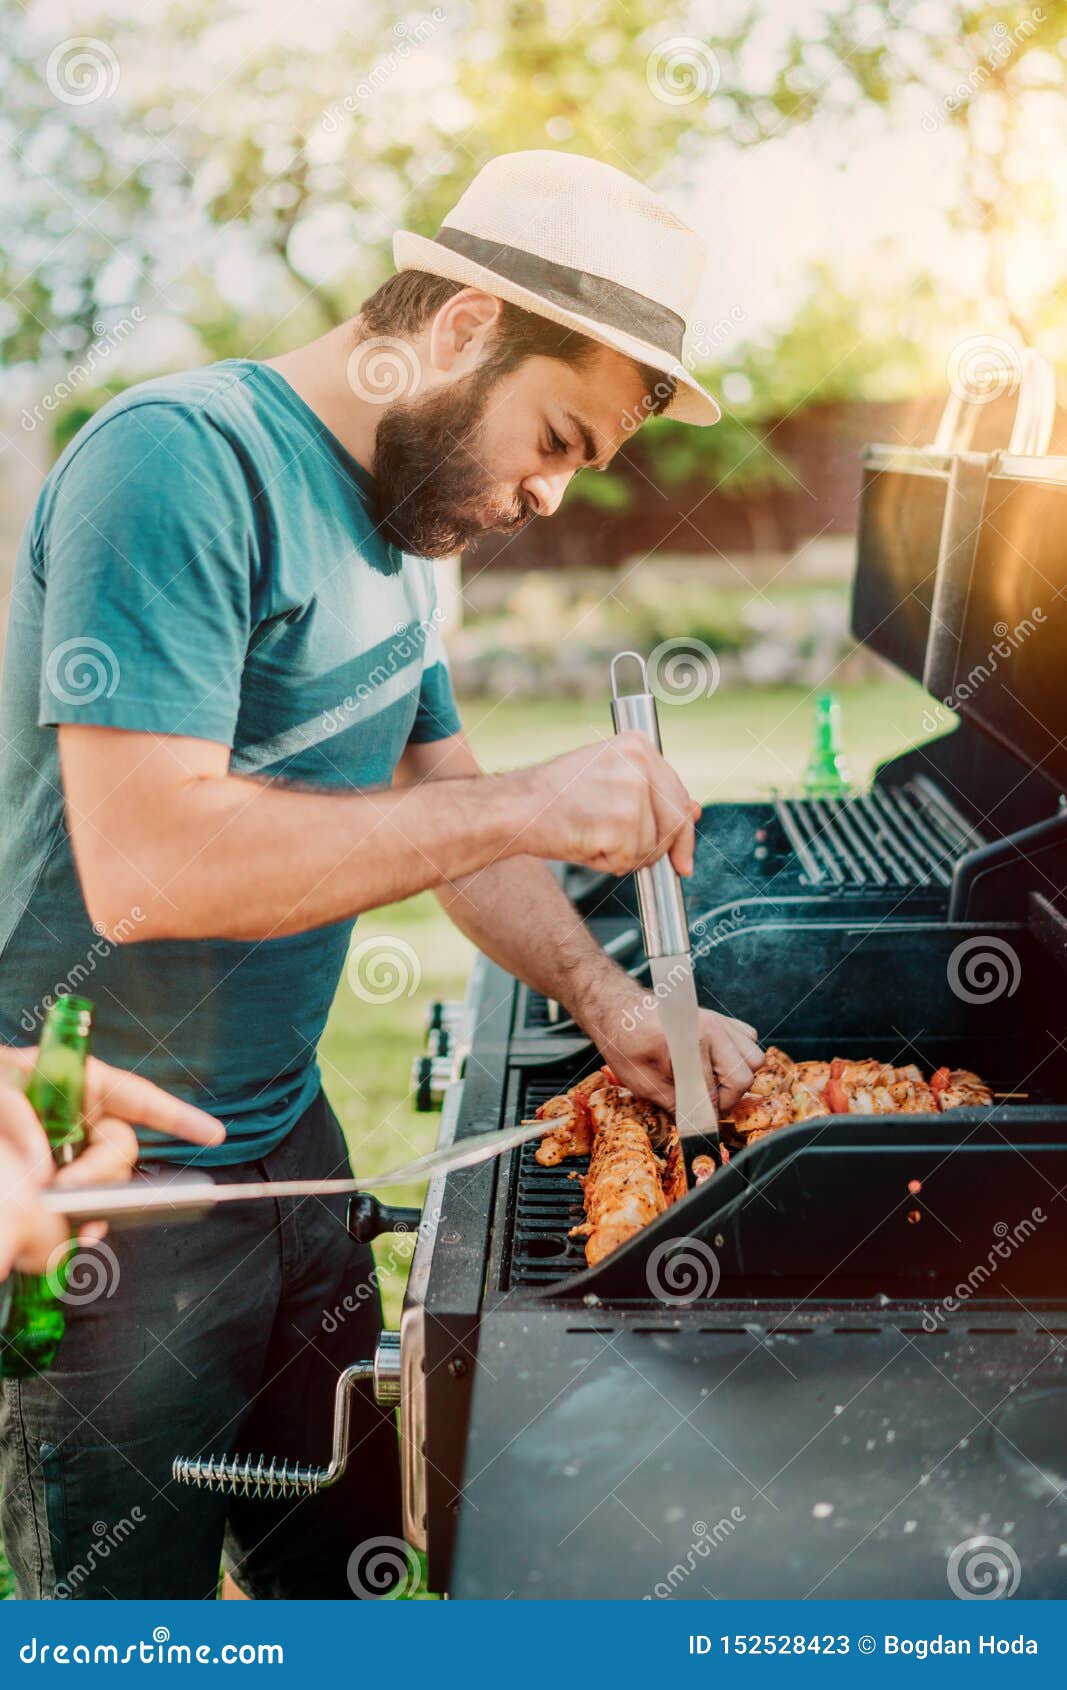 Bearded Man Grilling Chicken At Barbecue Party Stock Image Image Of Grill Carefree 152528423 